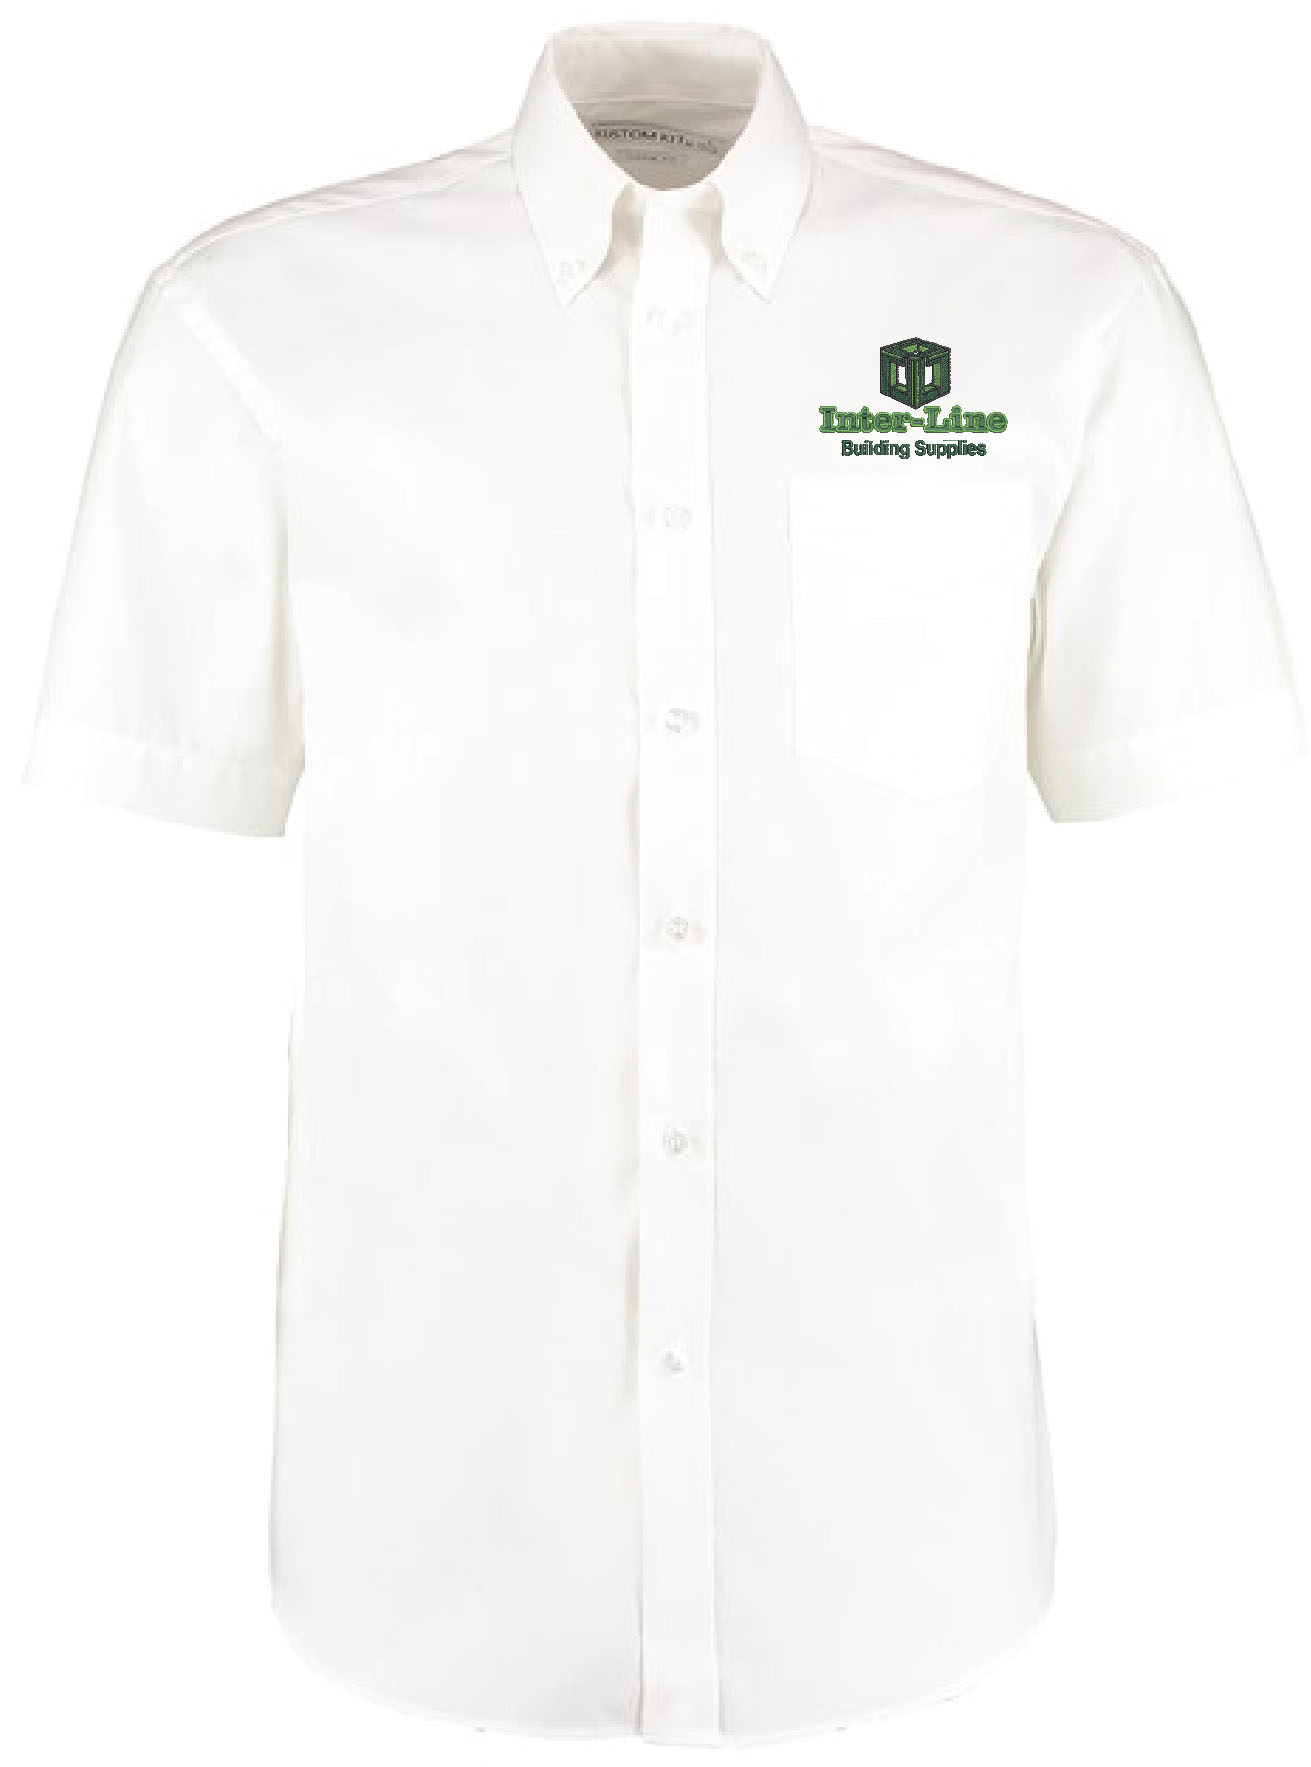 White | Corporate Oxford shirt short-sleeved (classic fit) | Uniform City